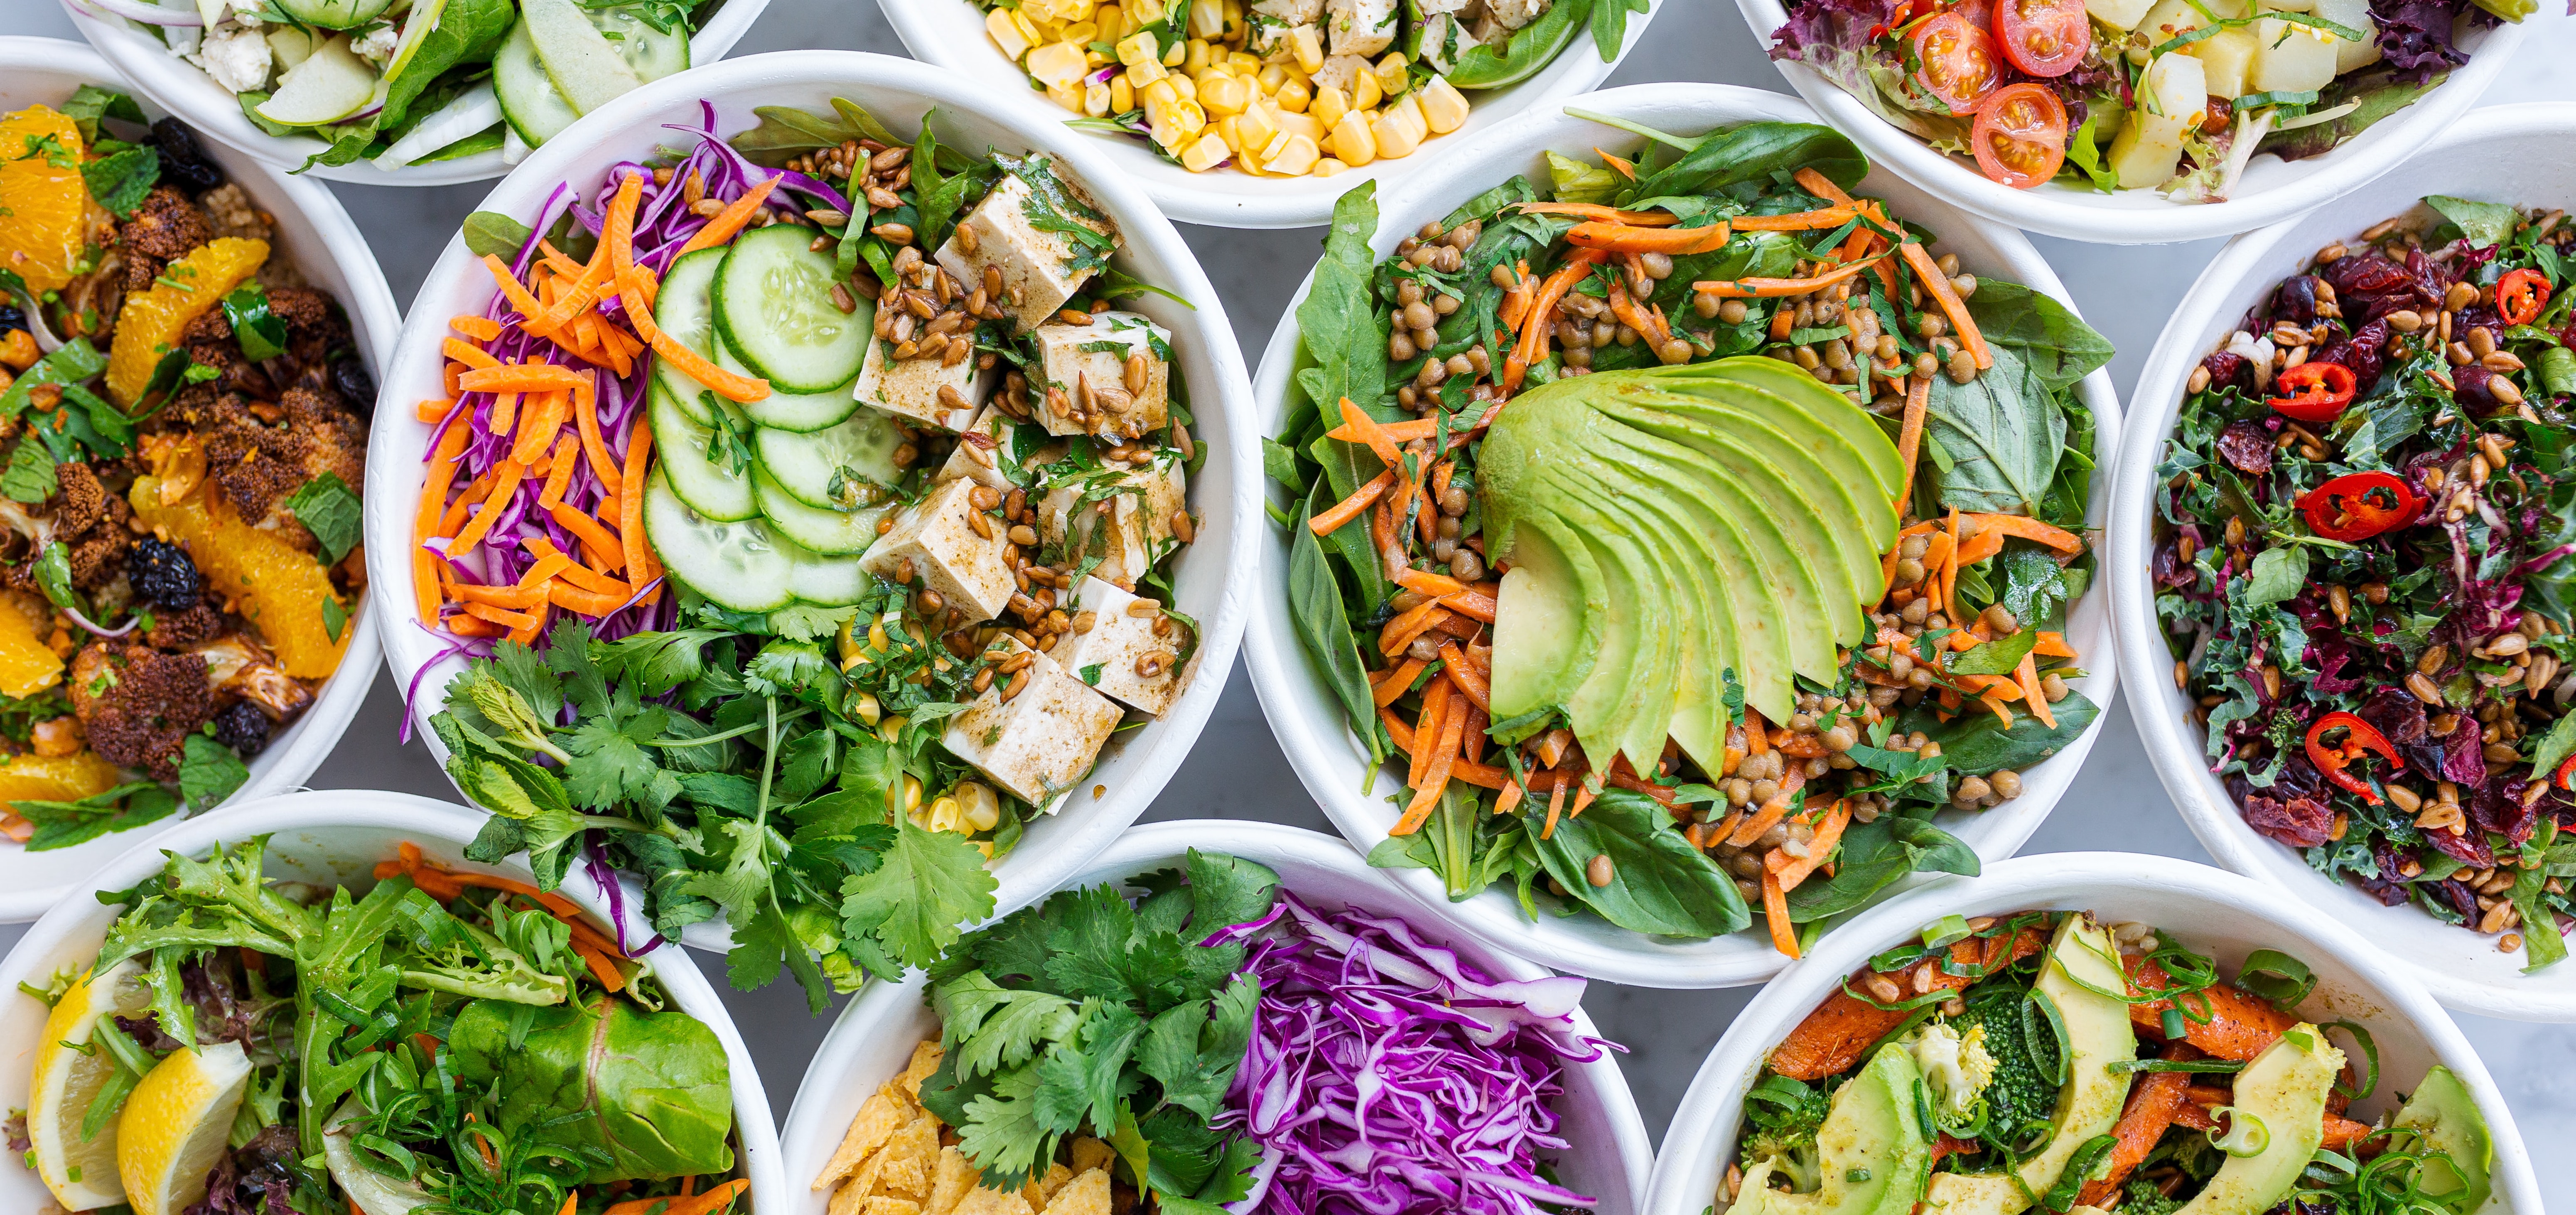 Bowls of salad with fresh and plant-based ingredients